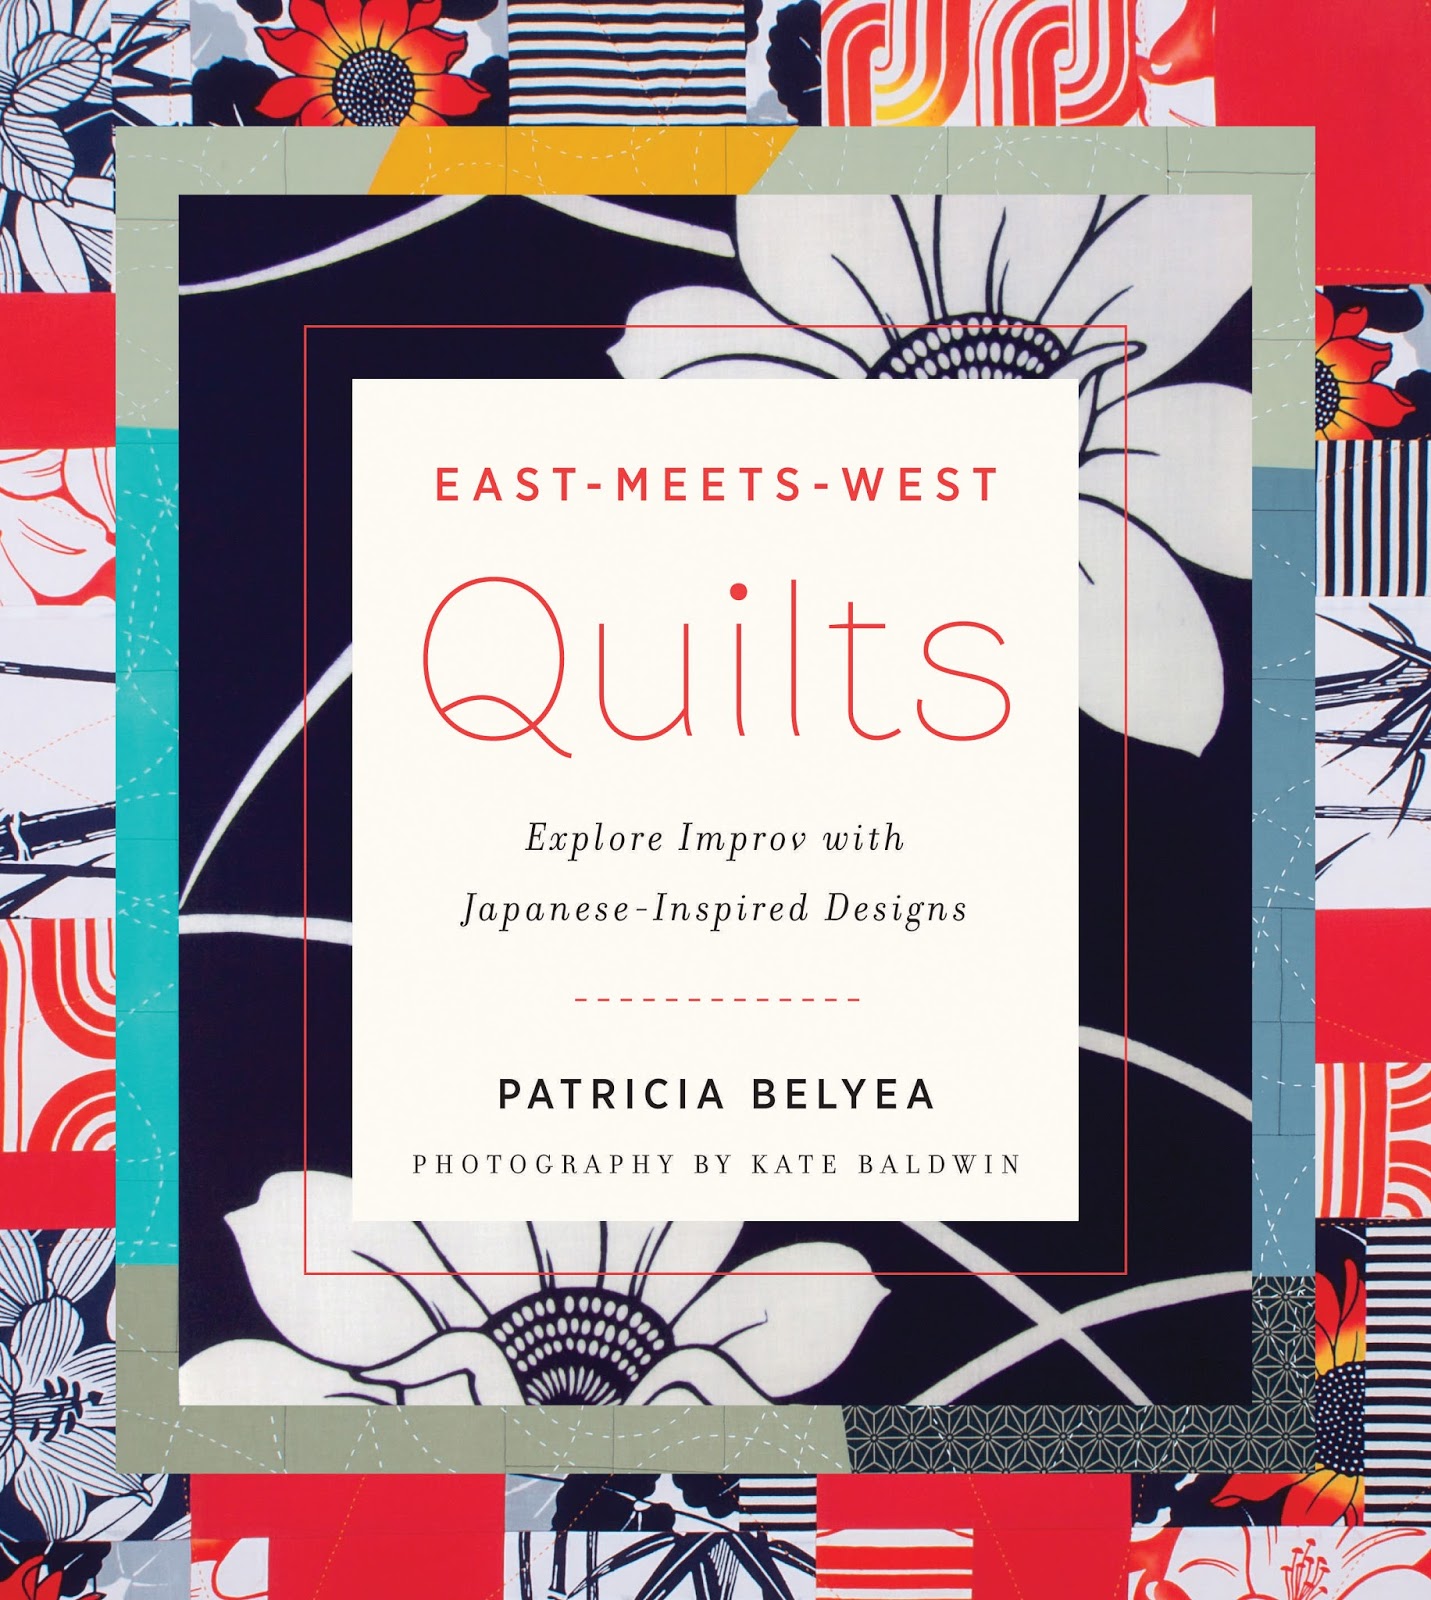 Book Review: "East Meets West Quilts: Explore Improv with Japanese